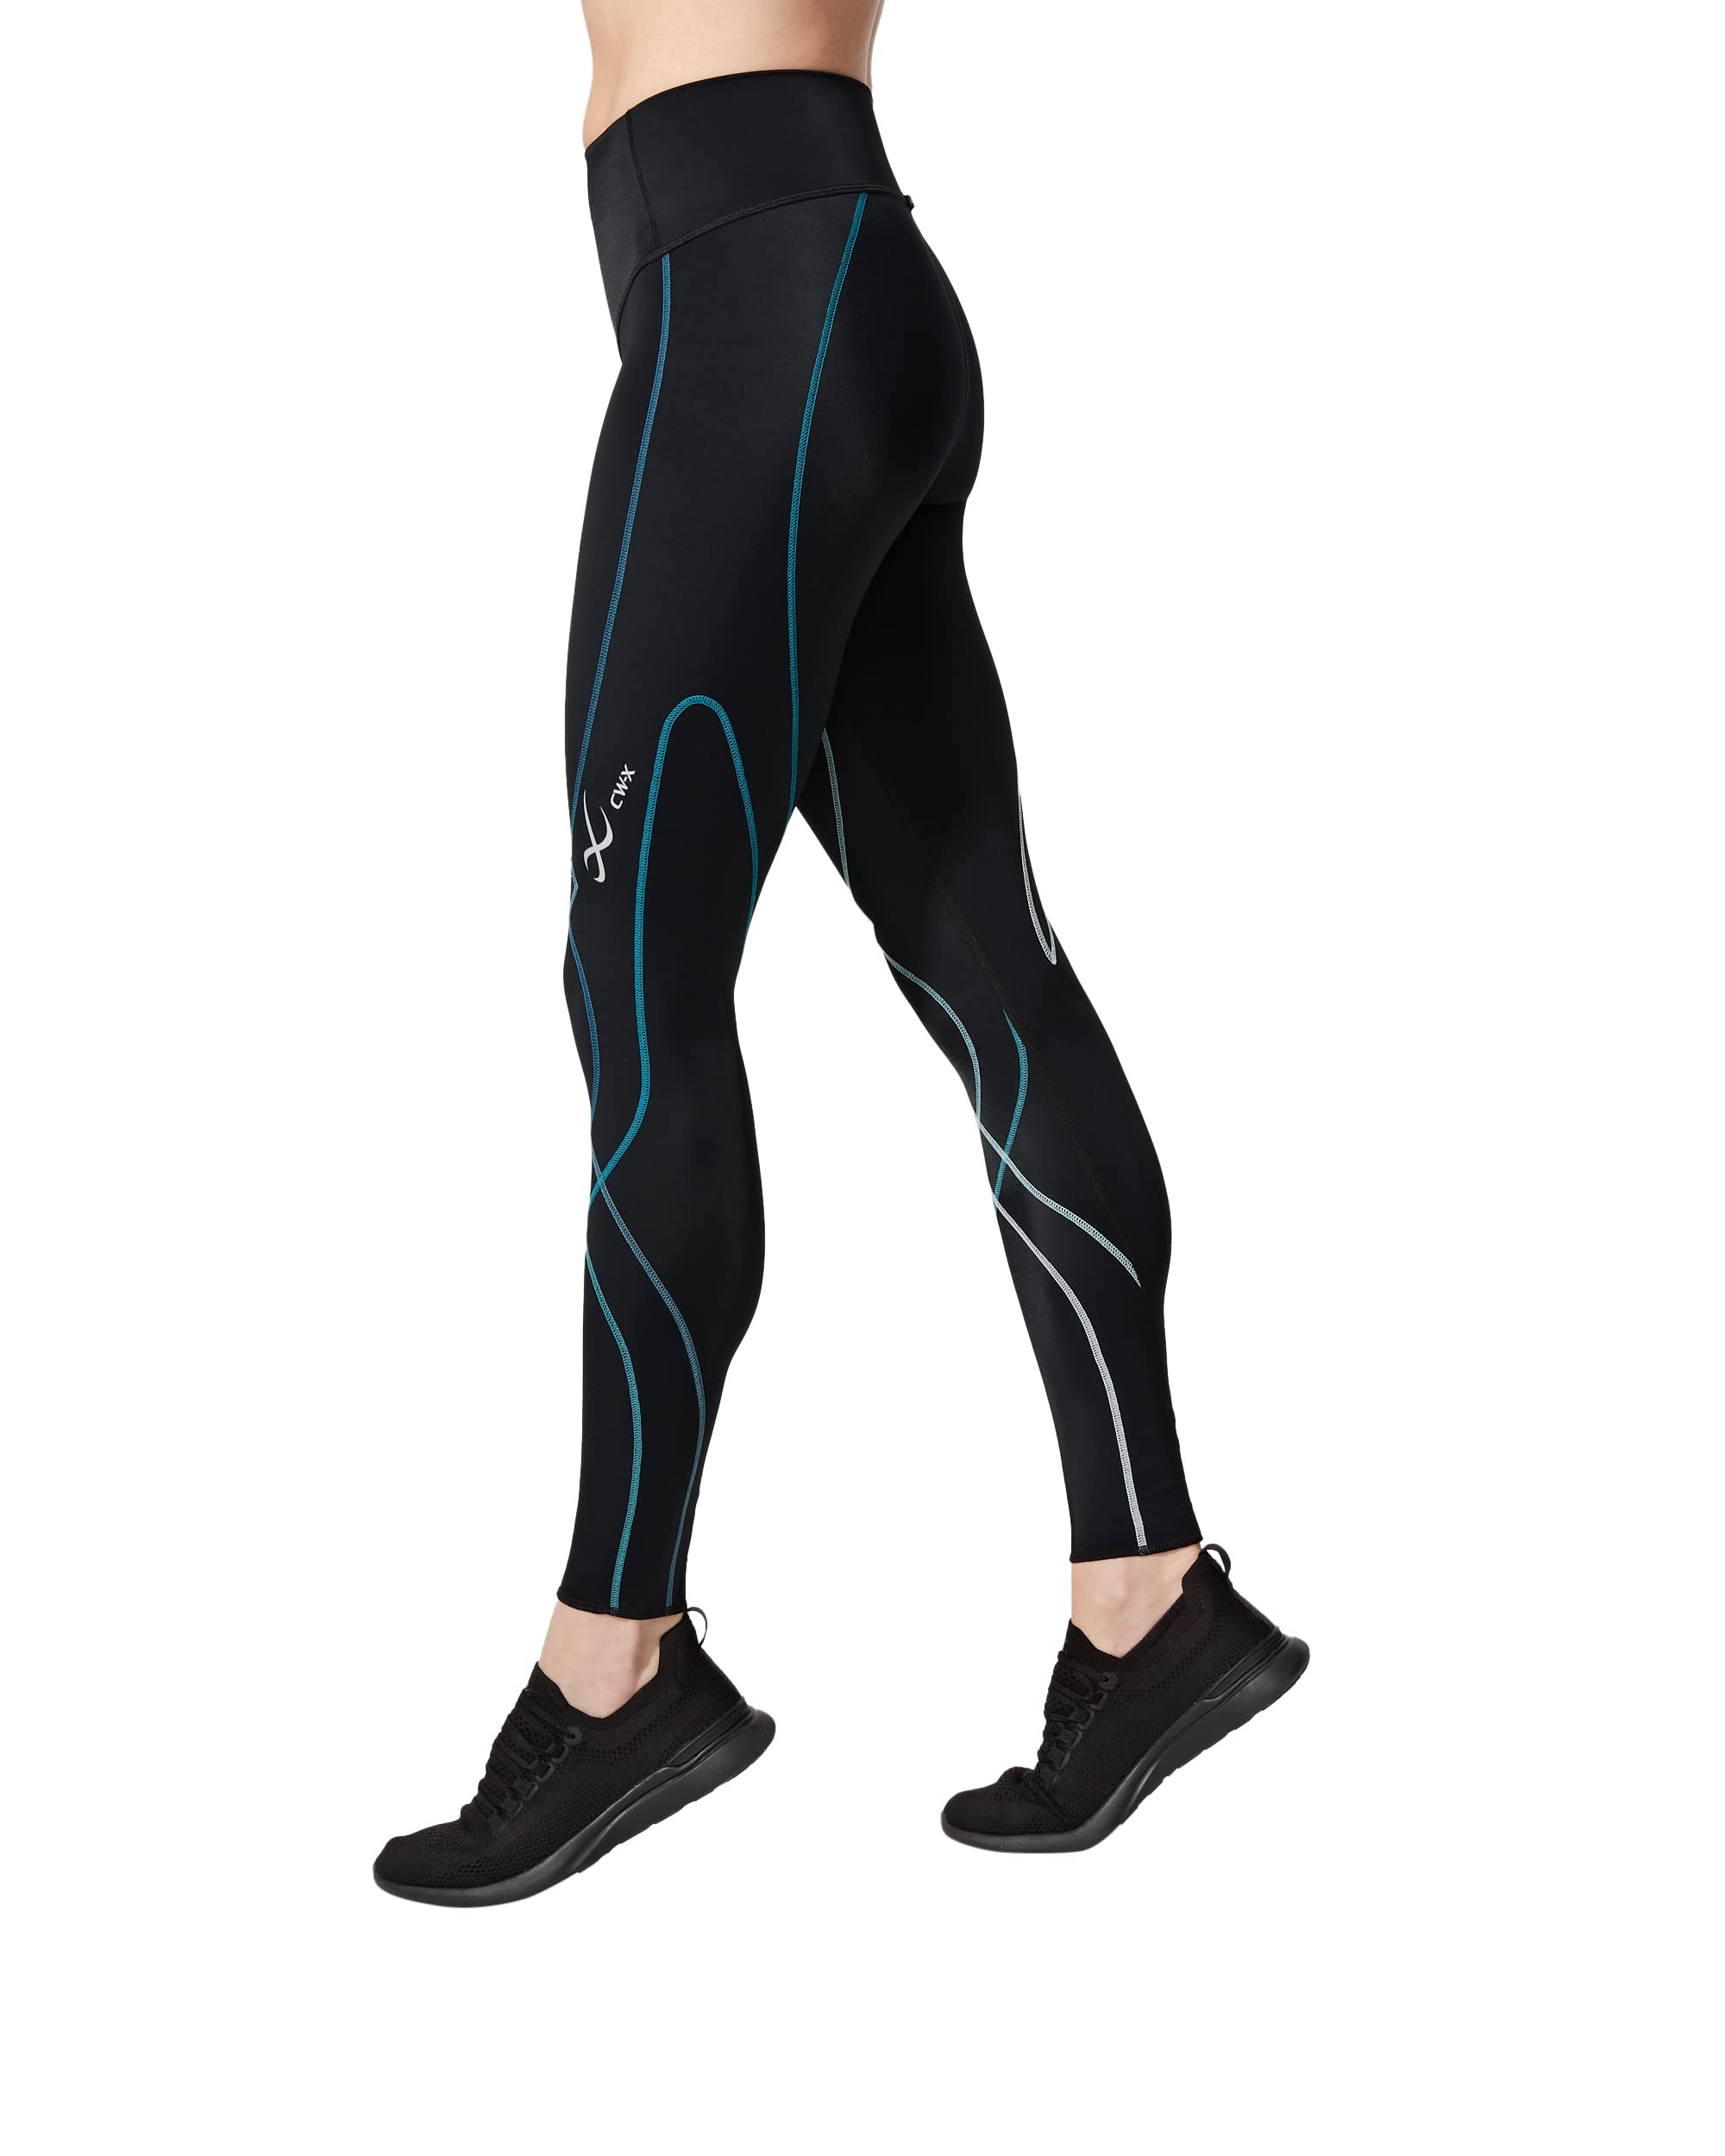 CW-X Women's Stabilyx 2.0 Joint Support Compression Tight